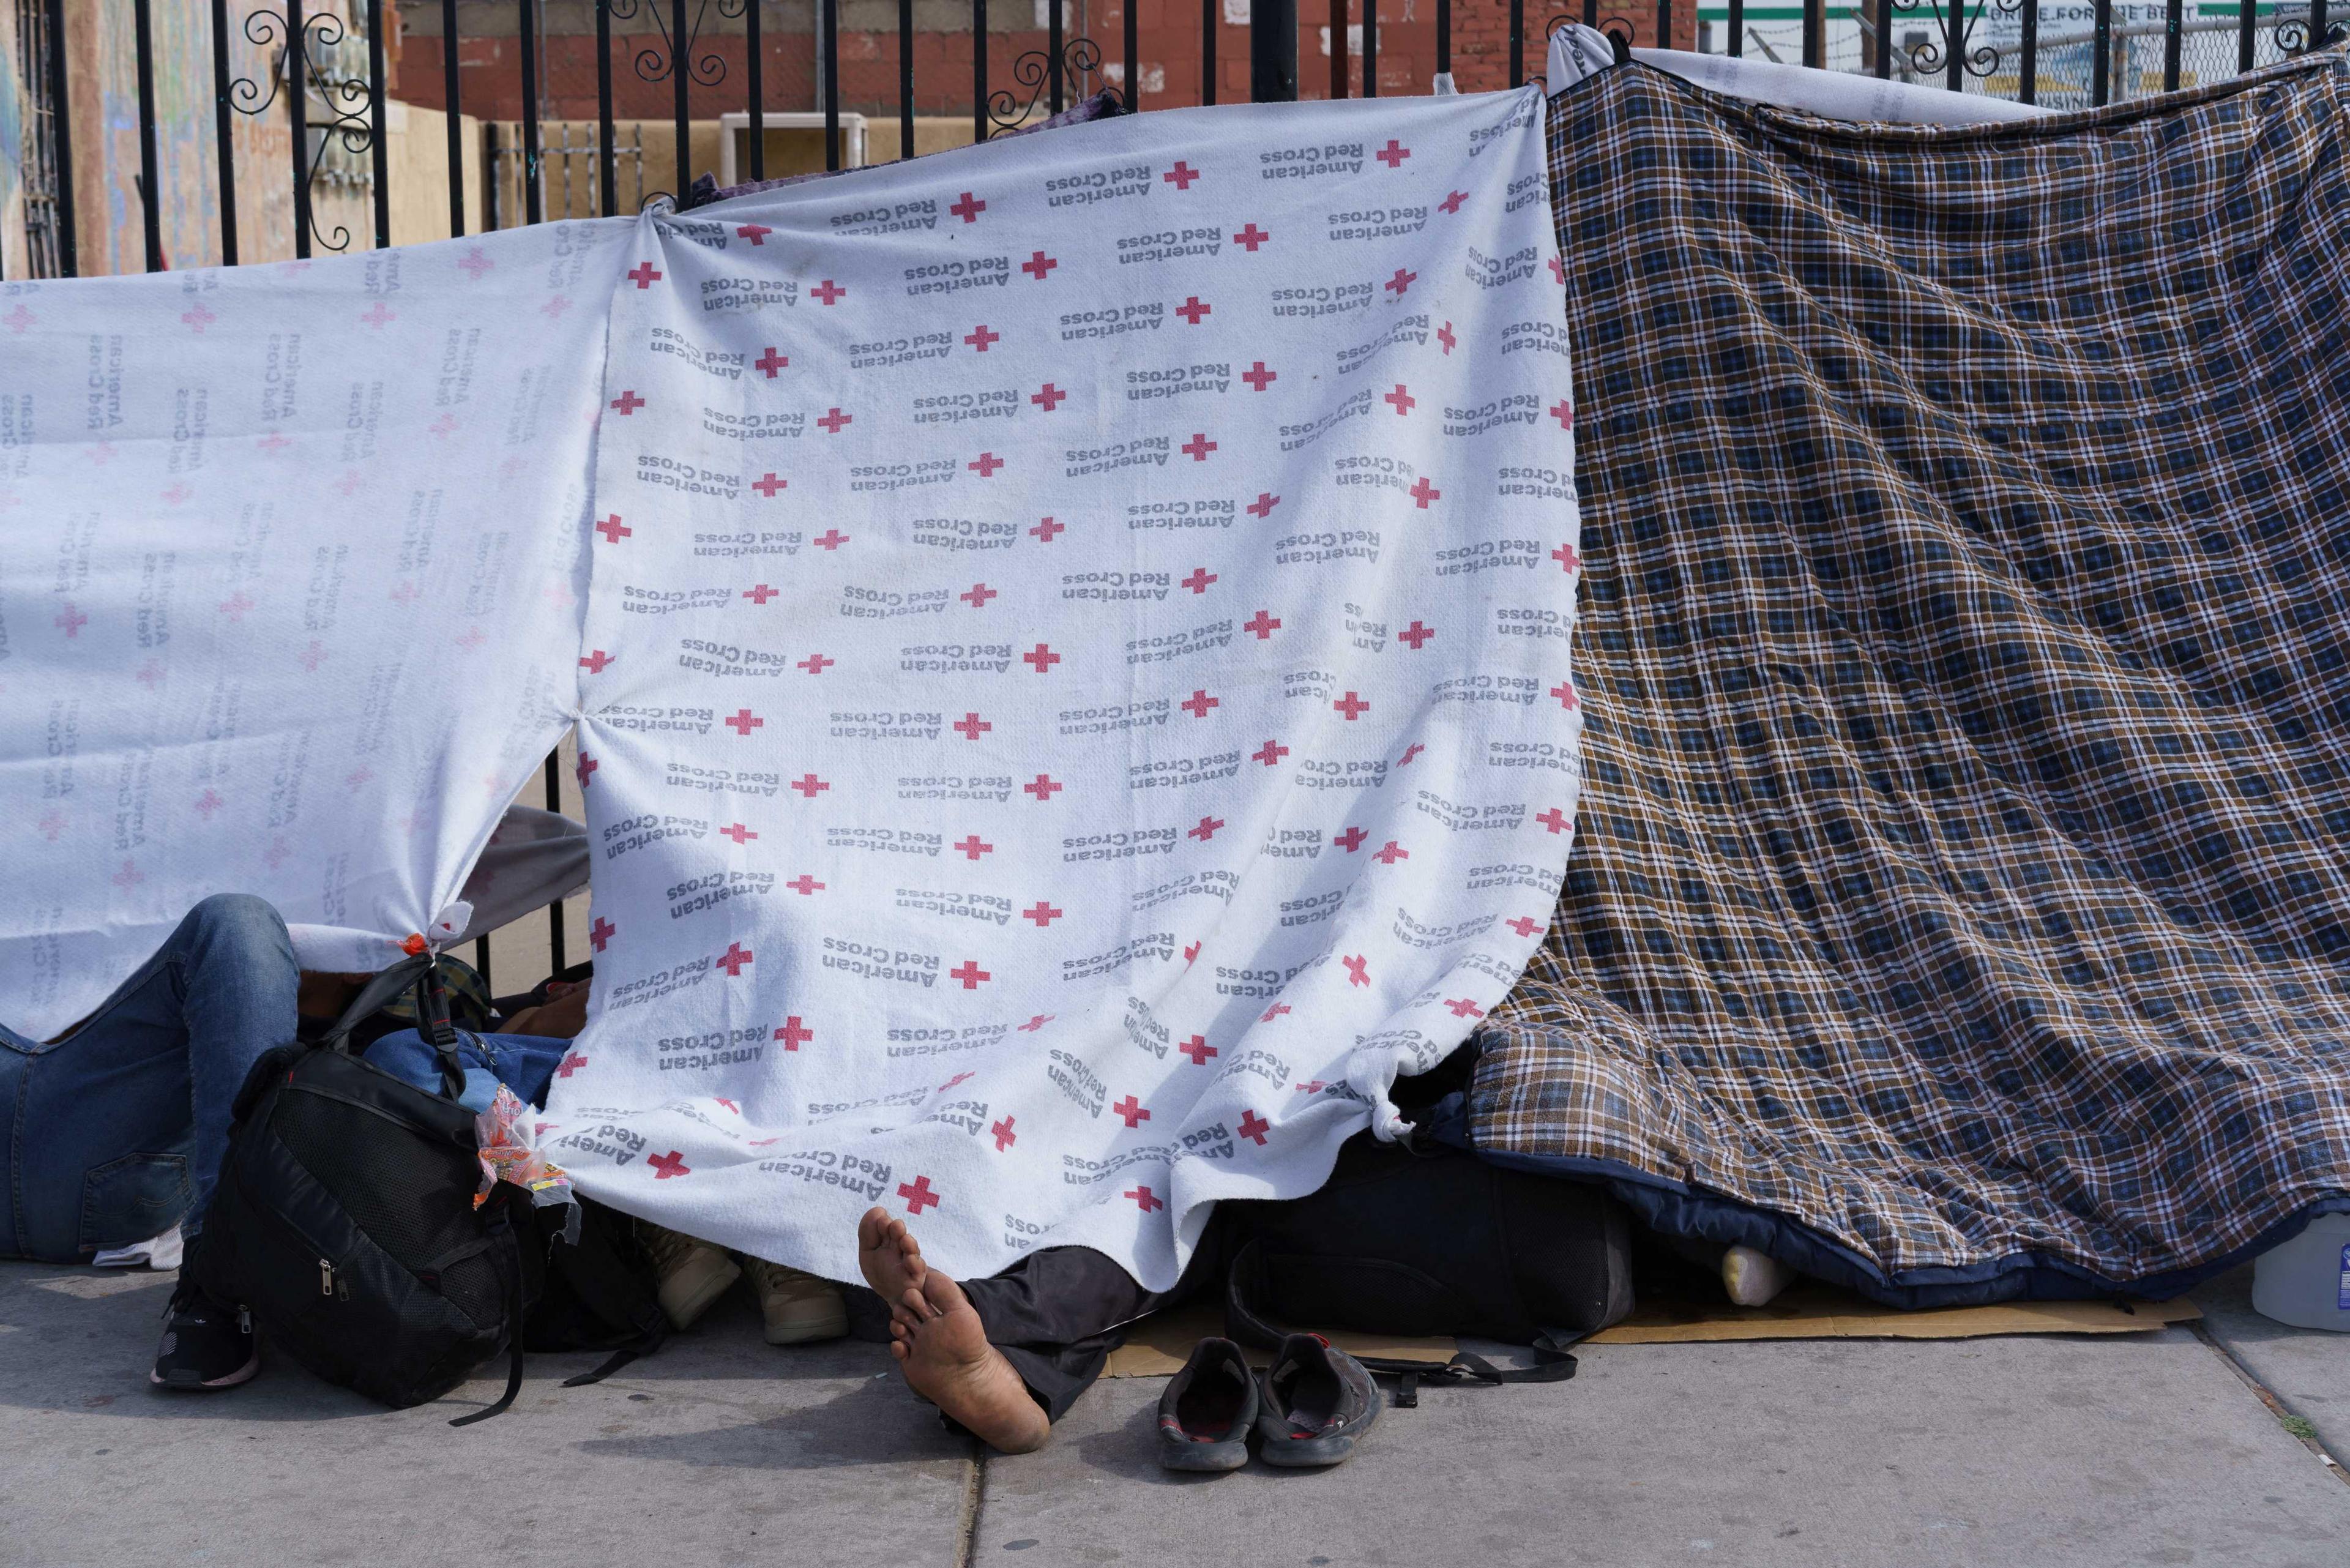 Migrants are camped out near the Sacred Heart Church in downtown El Paso, Texas, US April 30. Photo: Reuters